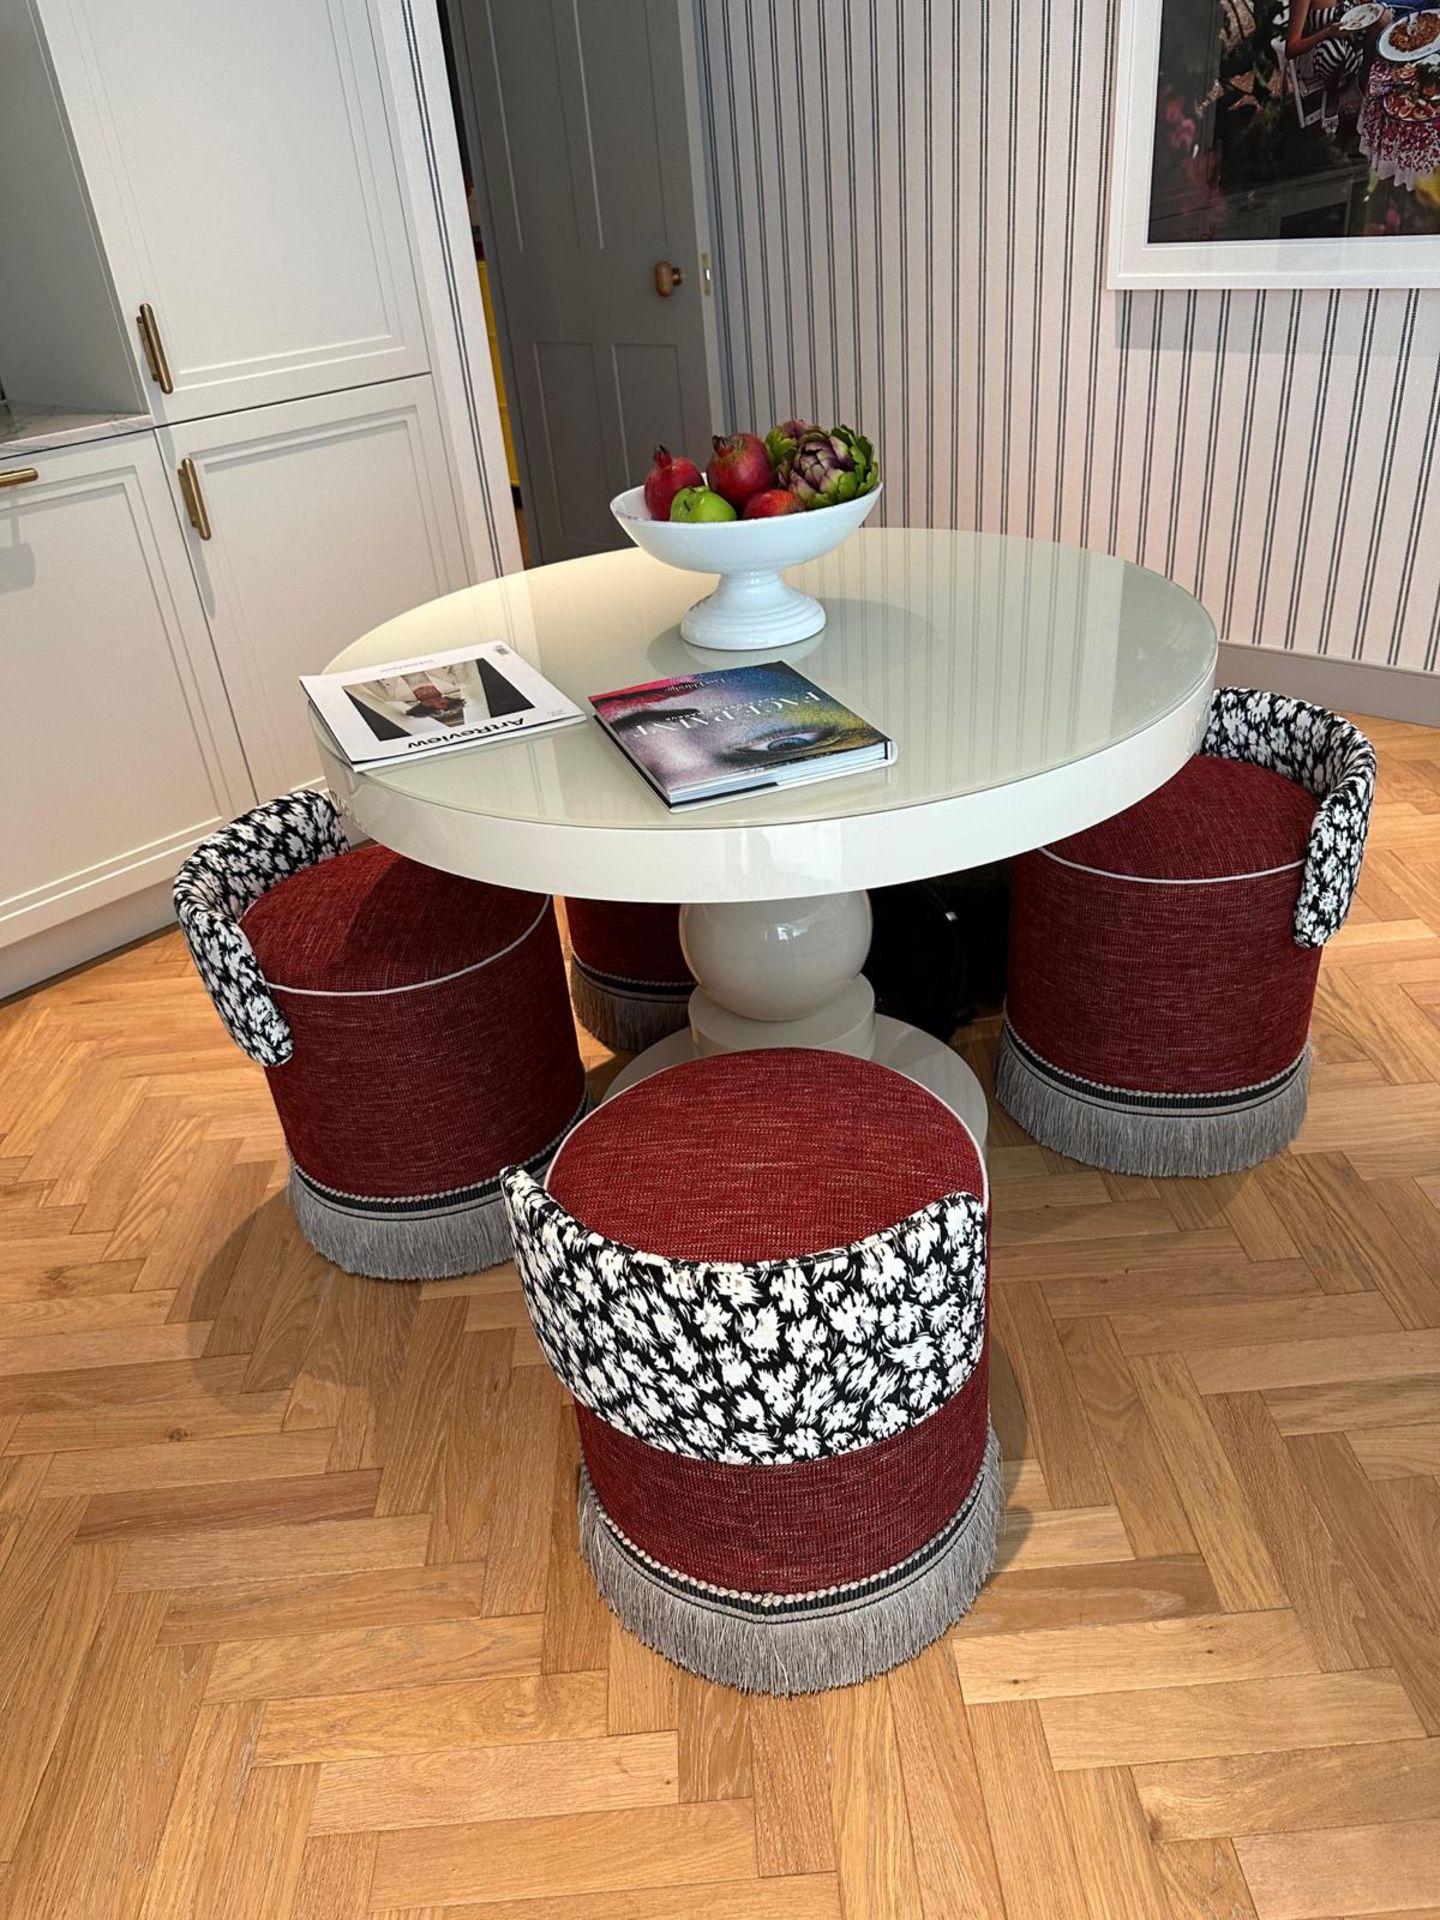 A Set Of 4 Retro-Style Upholstered Signature Pouf Chairs - The Ultimate Dining Seats! With A - Image 2 of 5